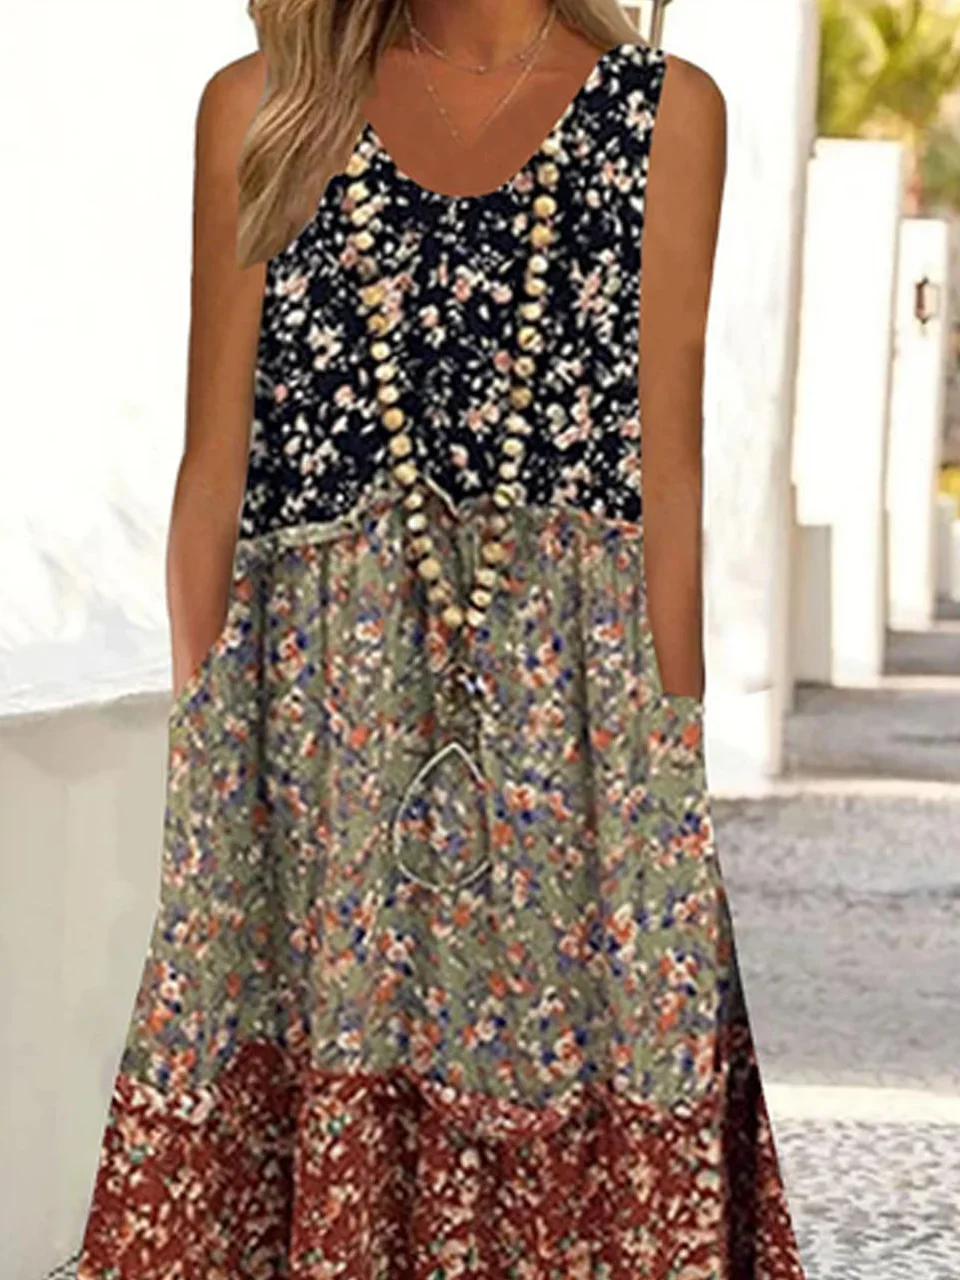 Loose Casual Floral Pritned Sleeveless Dress